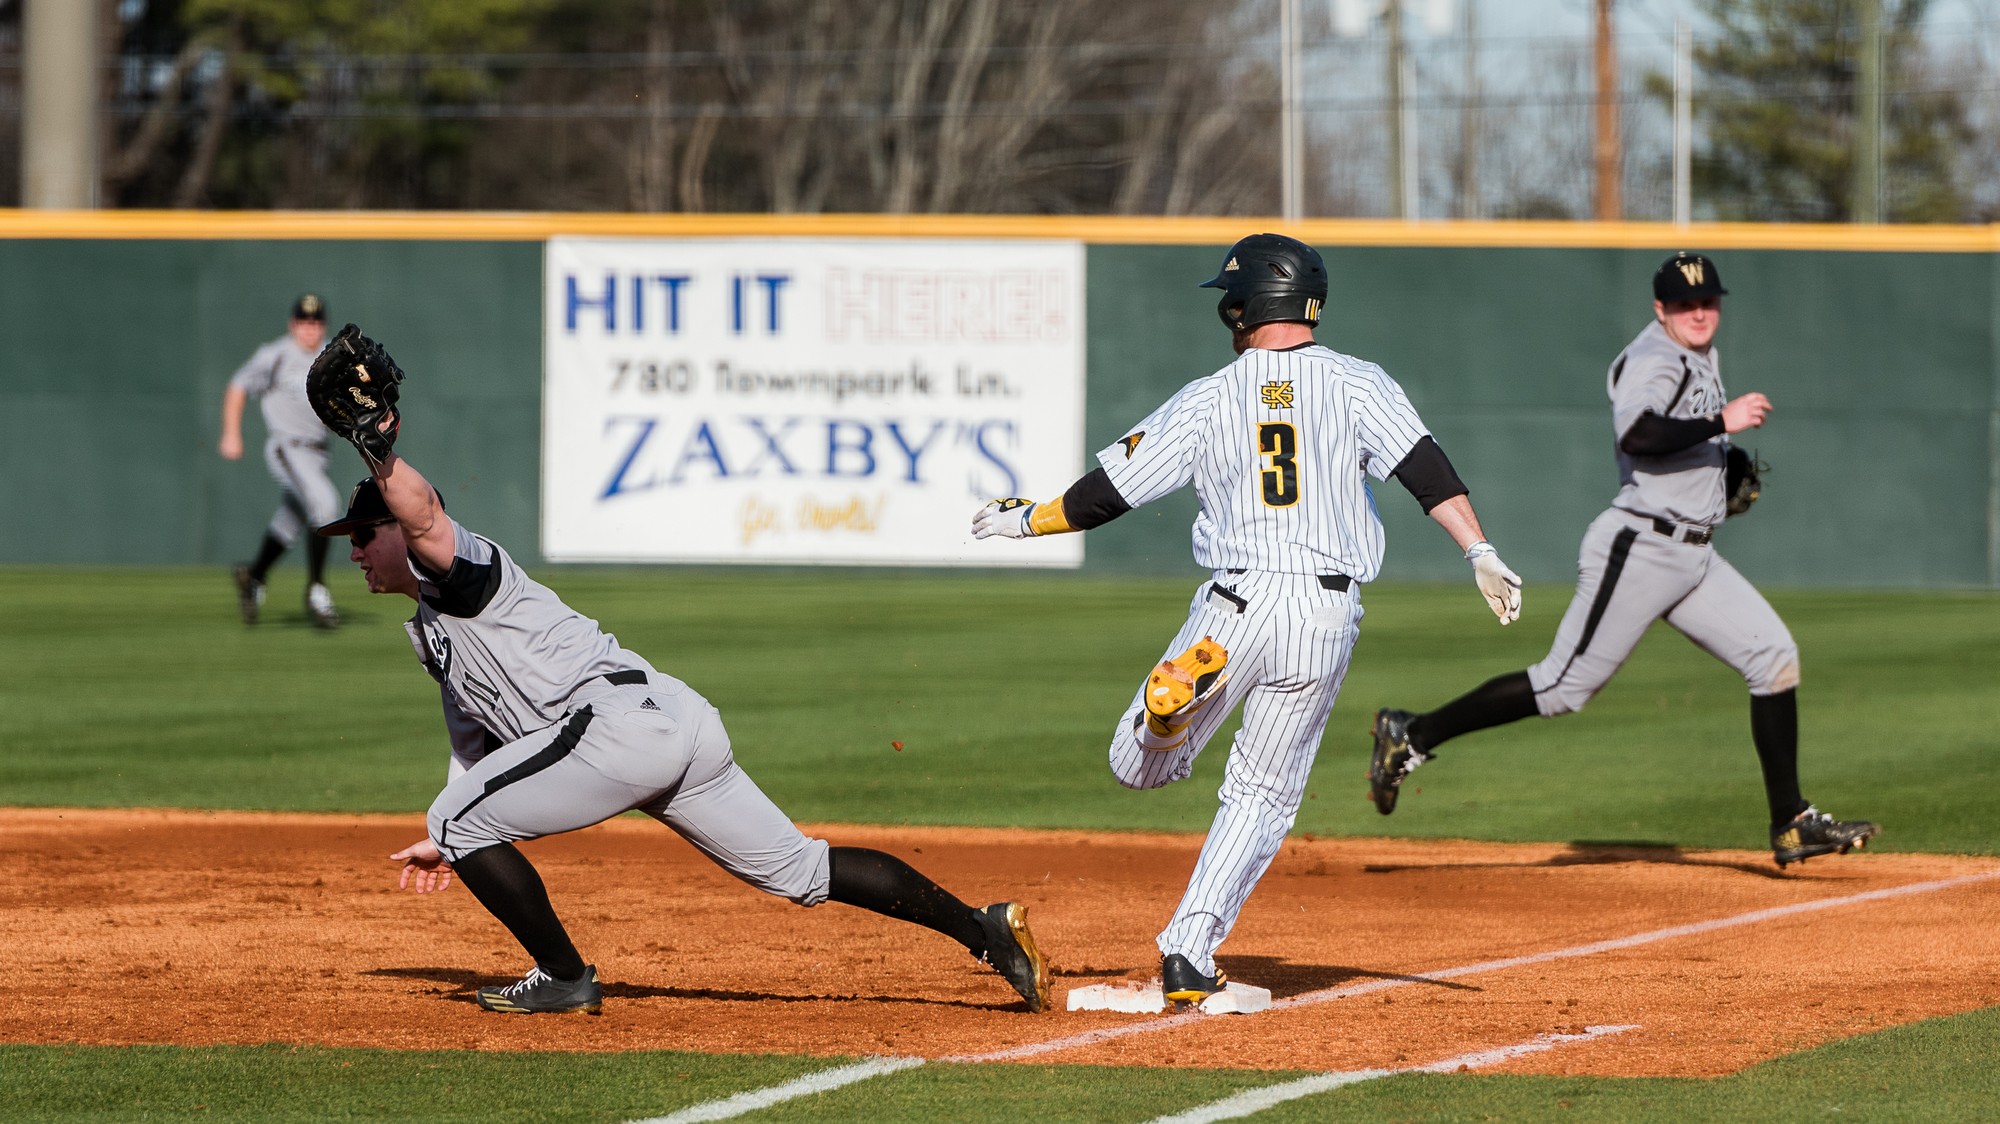 Owls win one, drop two to Middle Tennessee in weekend series